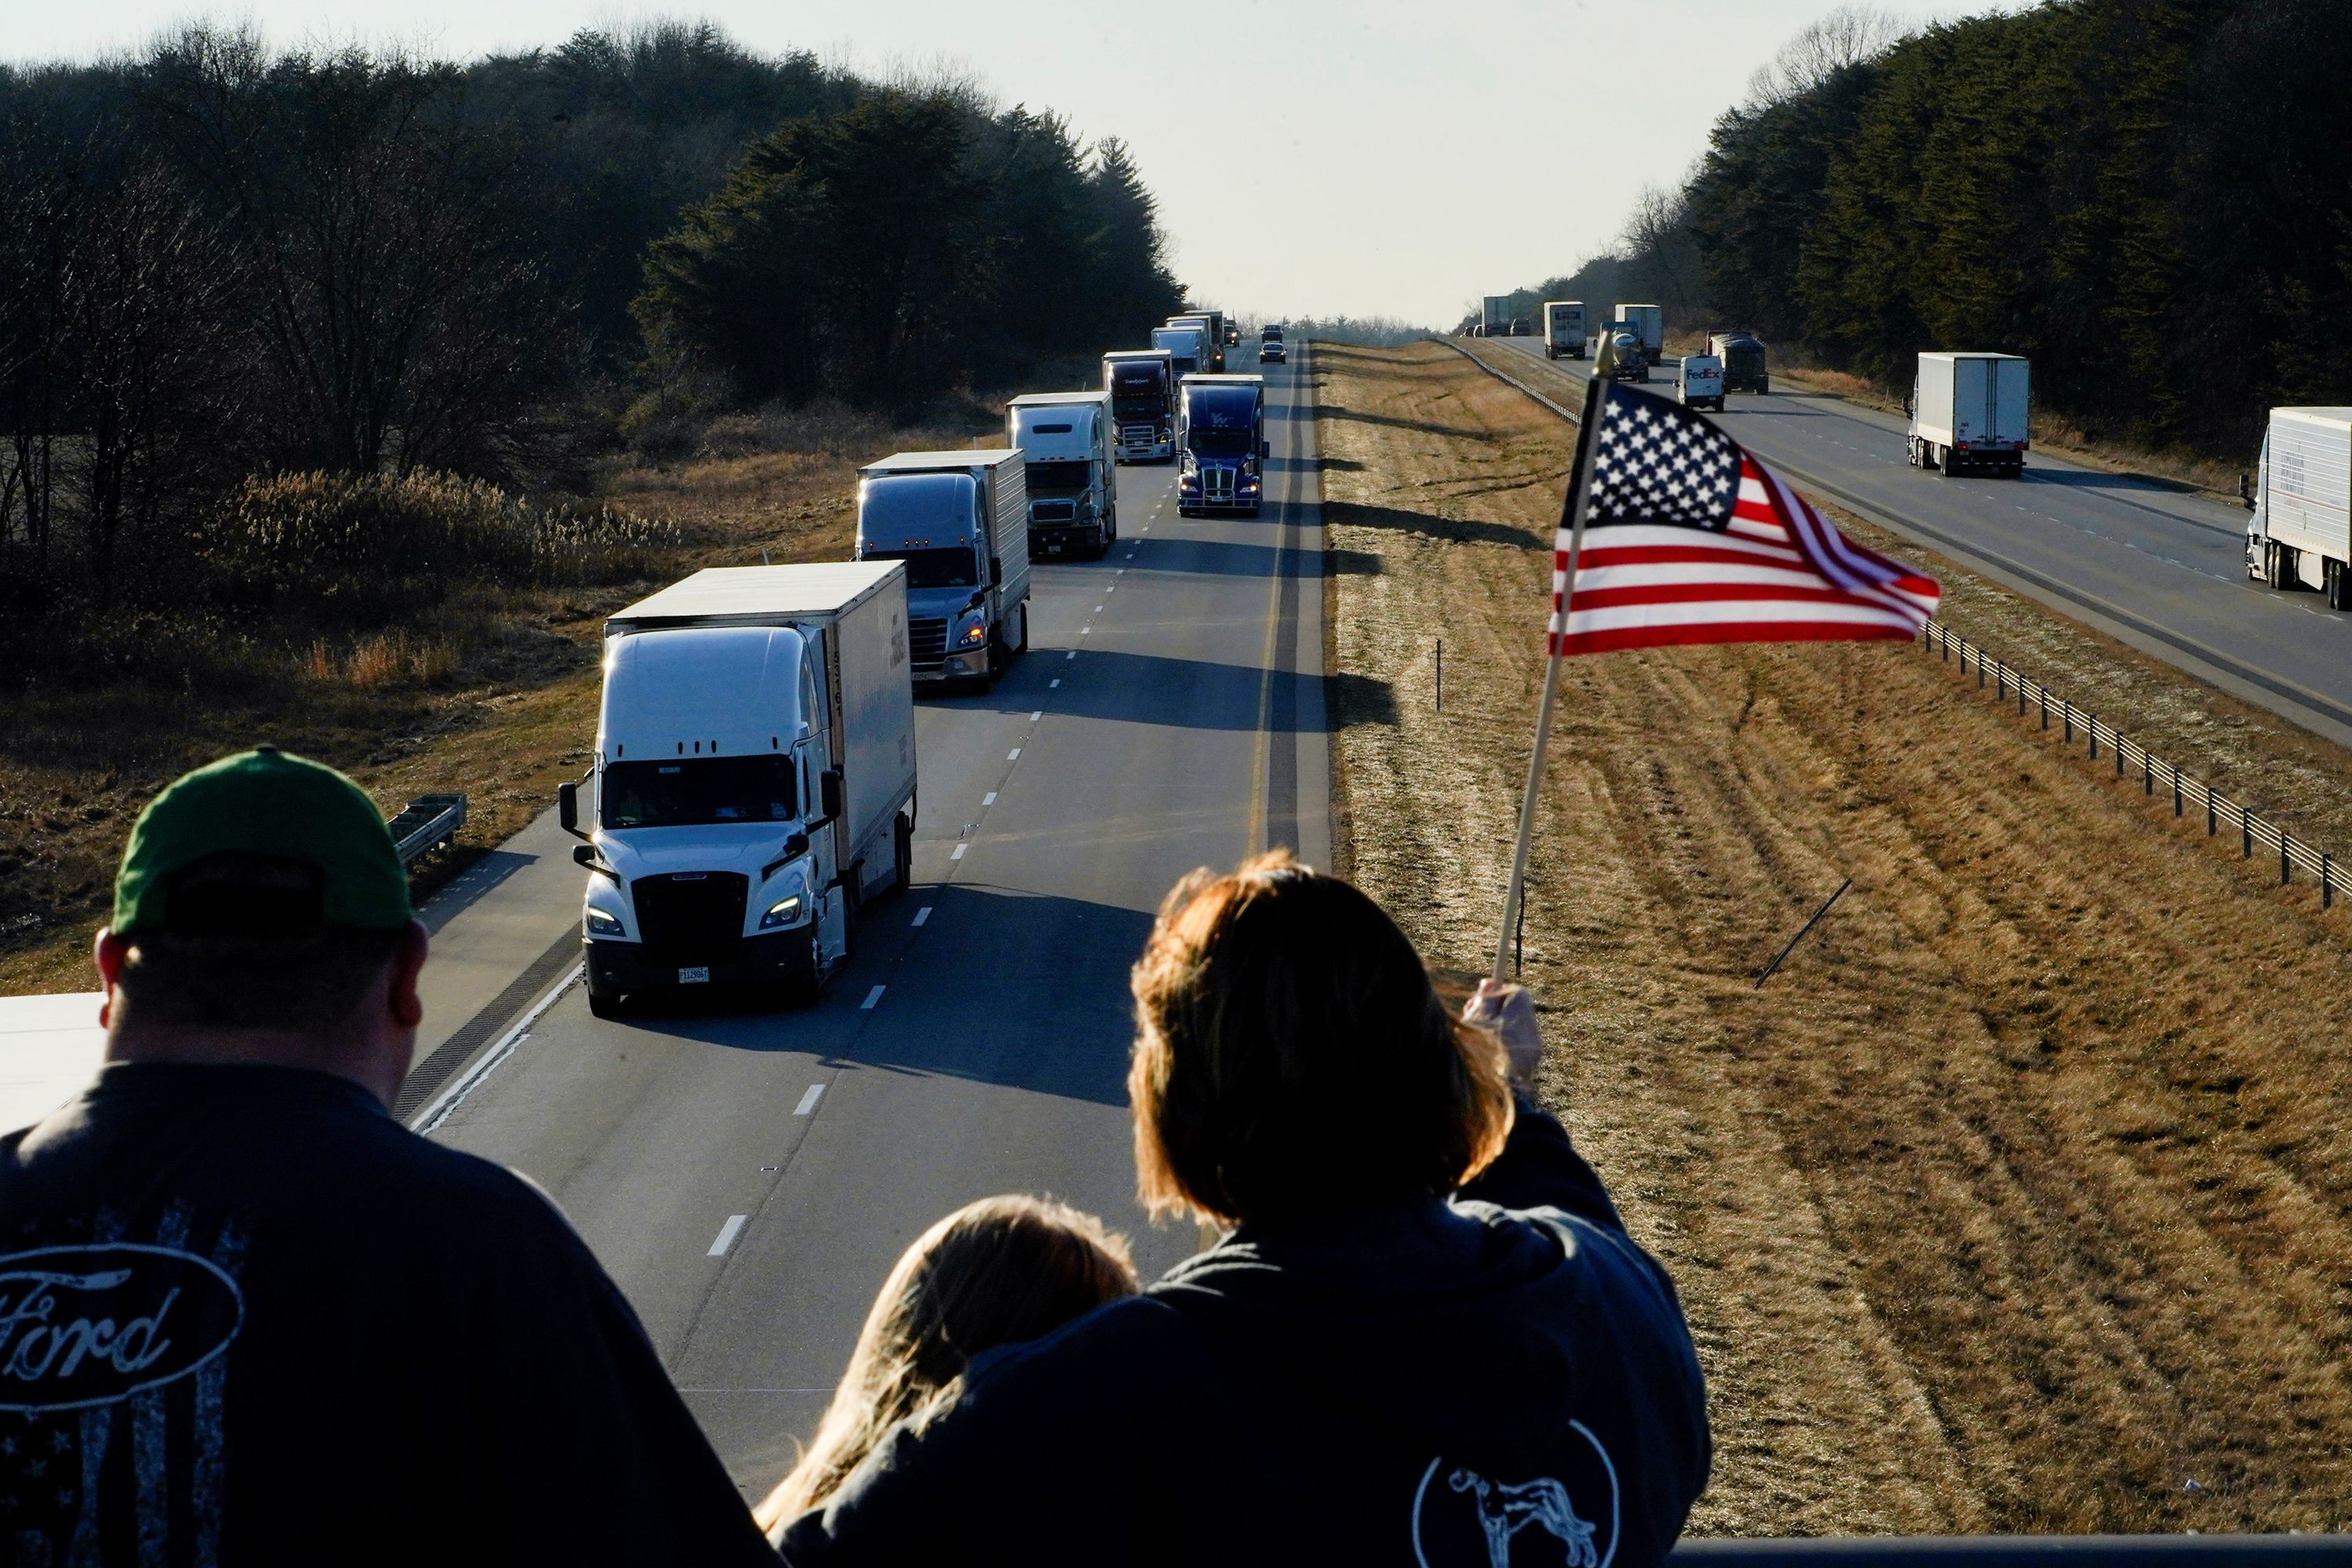 A convoy of truckers protesting Covid-19 measures is expected to arrive in  the DC area this weekend. Here's what we know